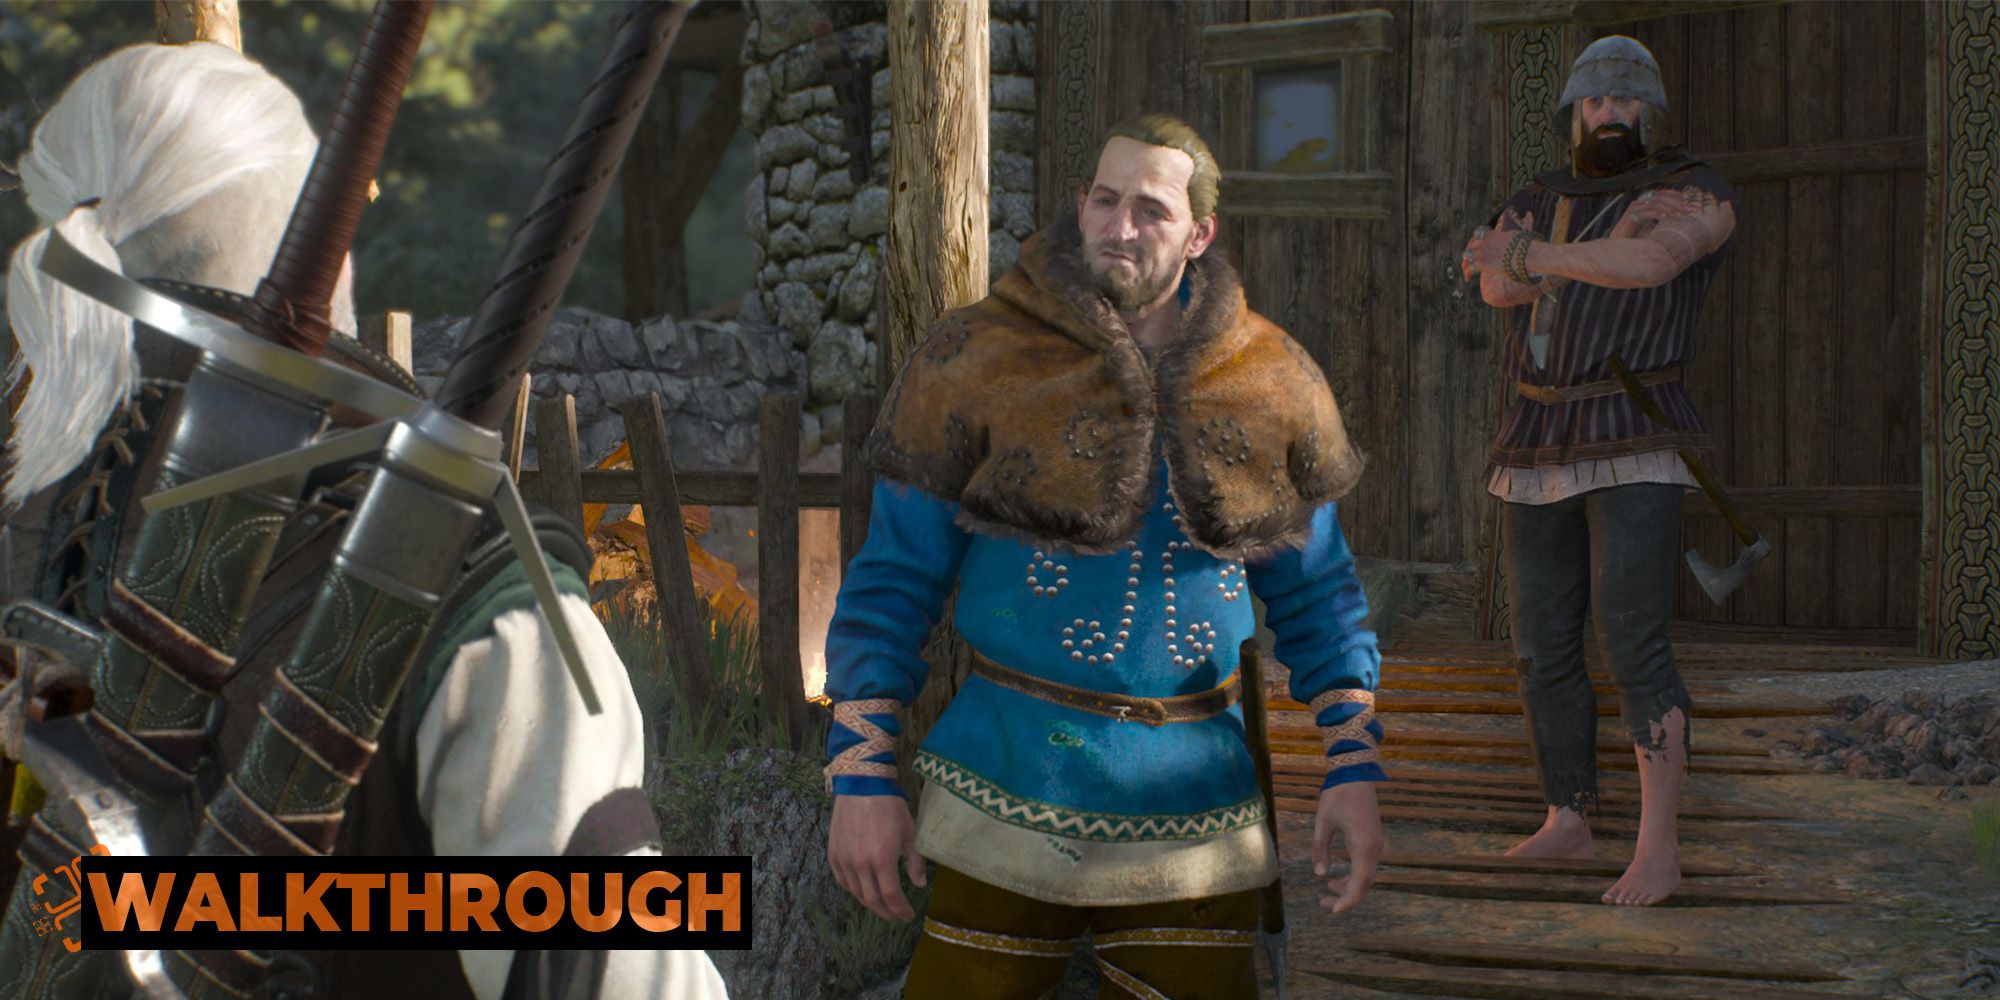 King's Gambit - Witcher 3 